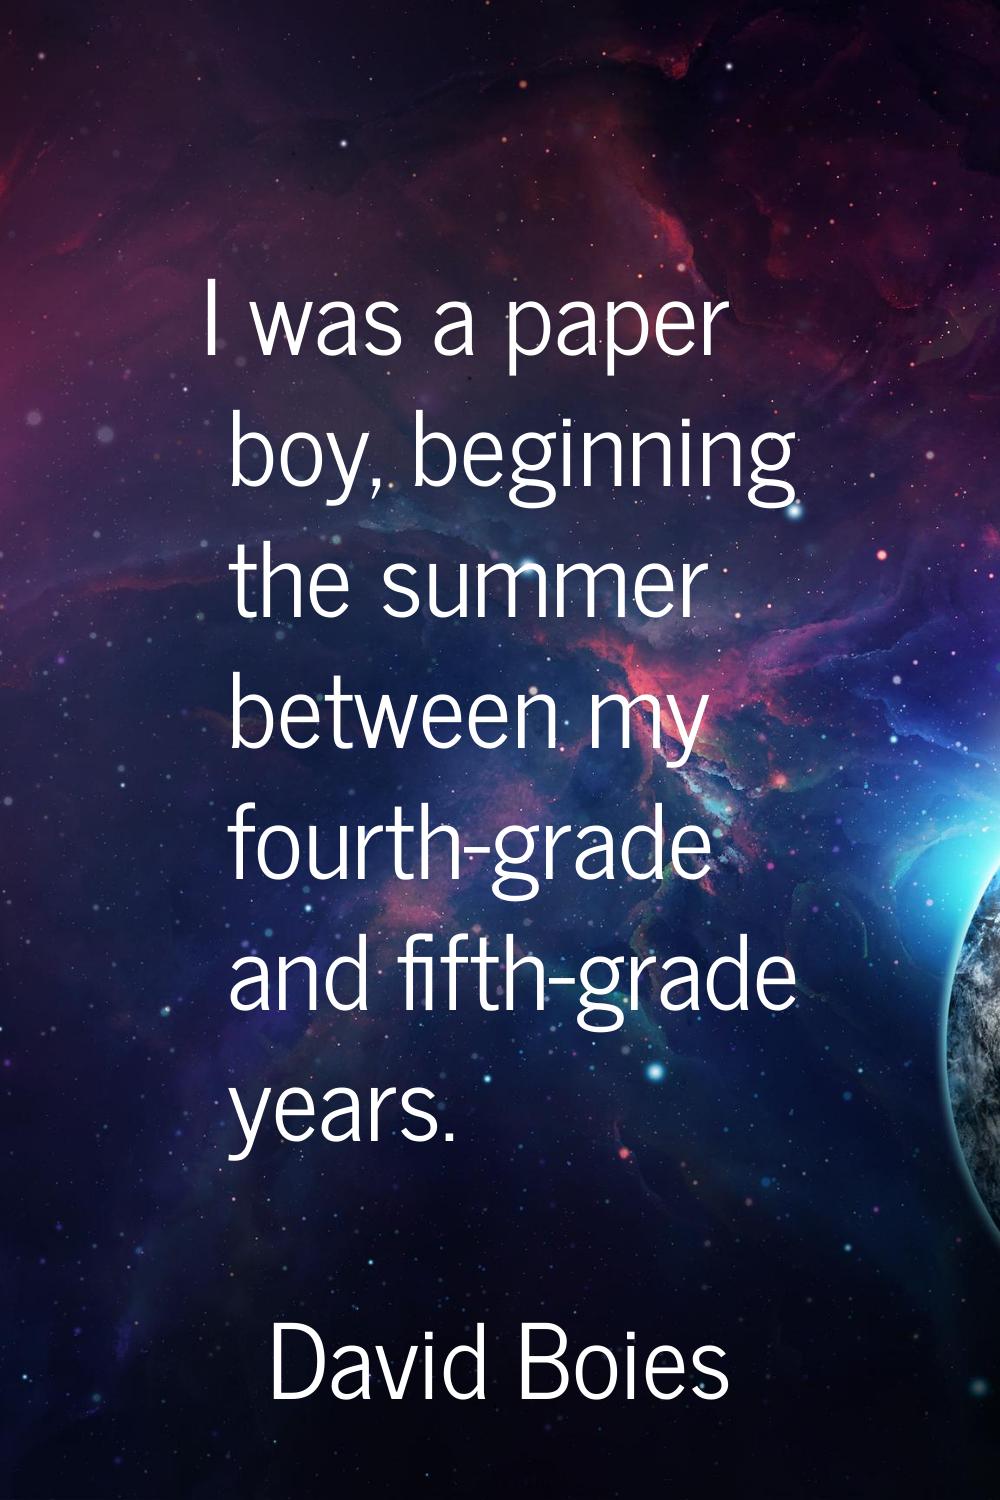 I was a paper boy, beginning the summer between my fourth-grade and fifth-grade years.